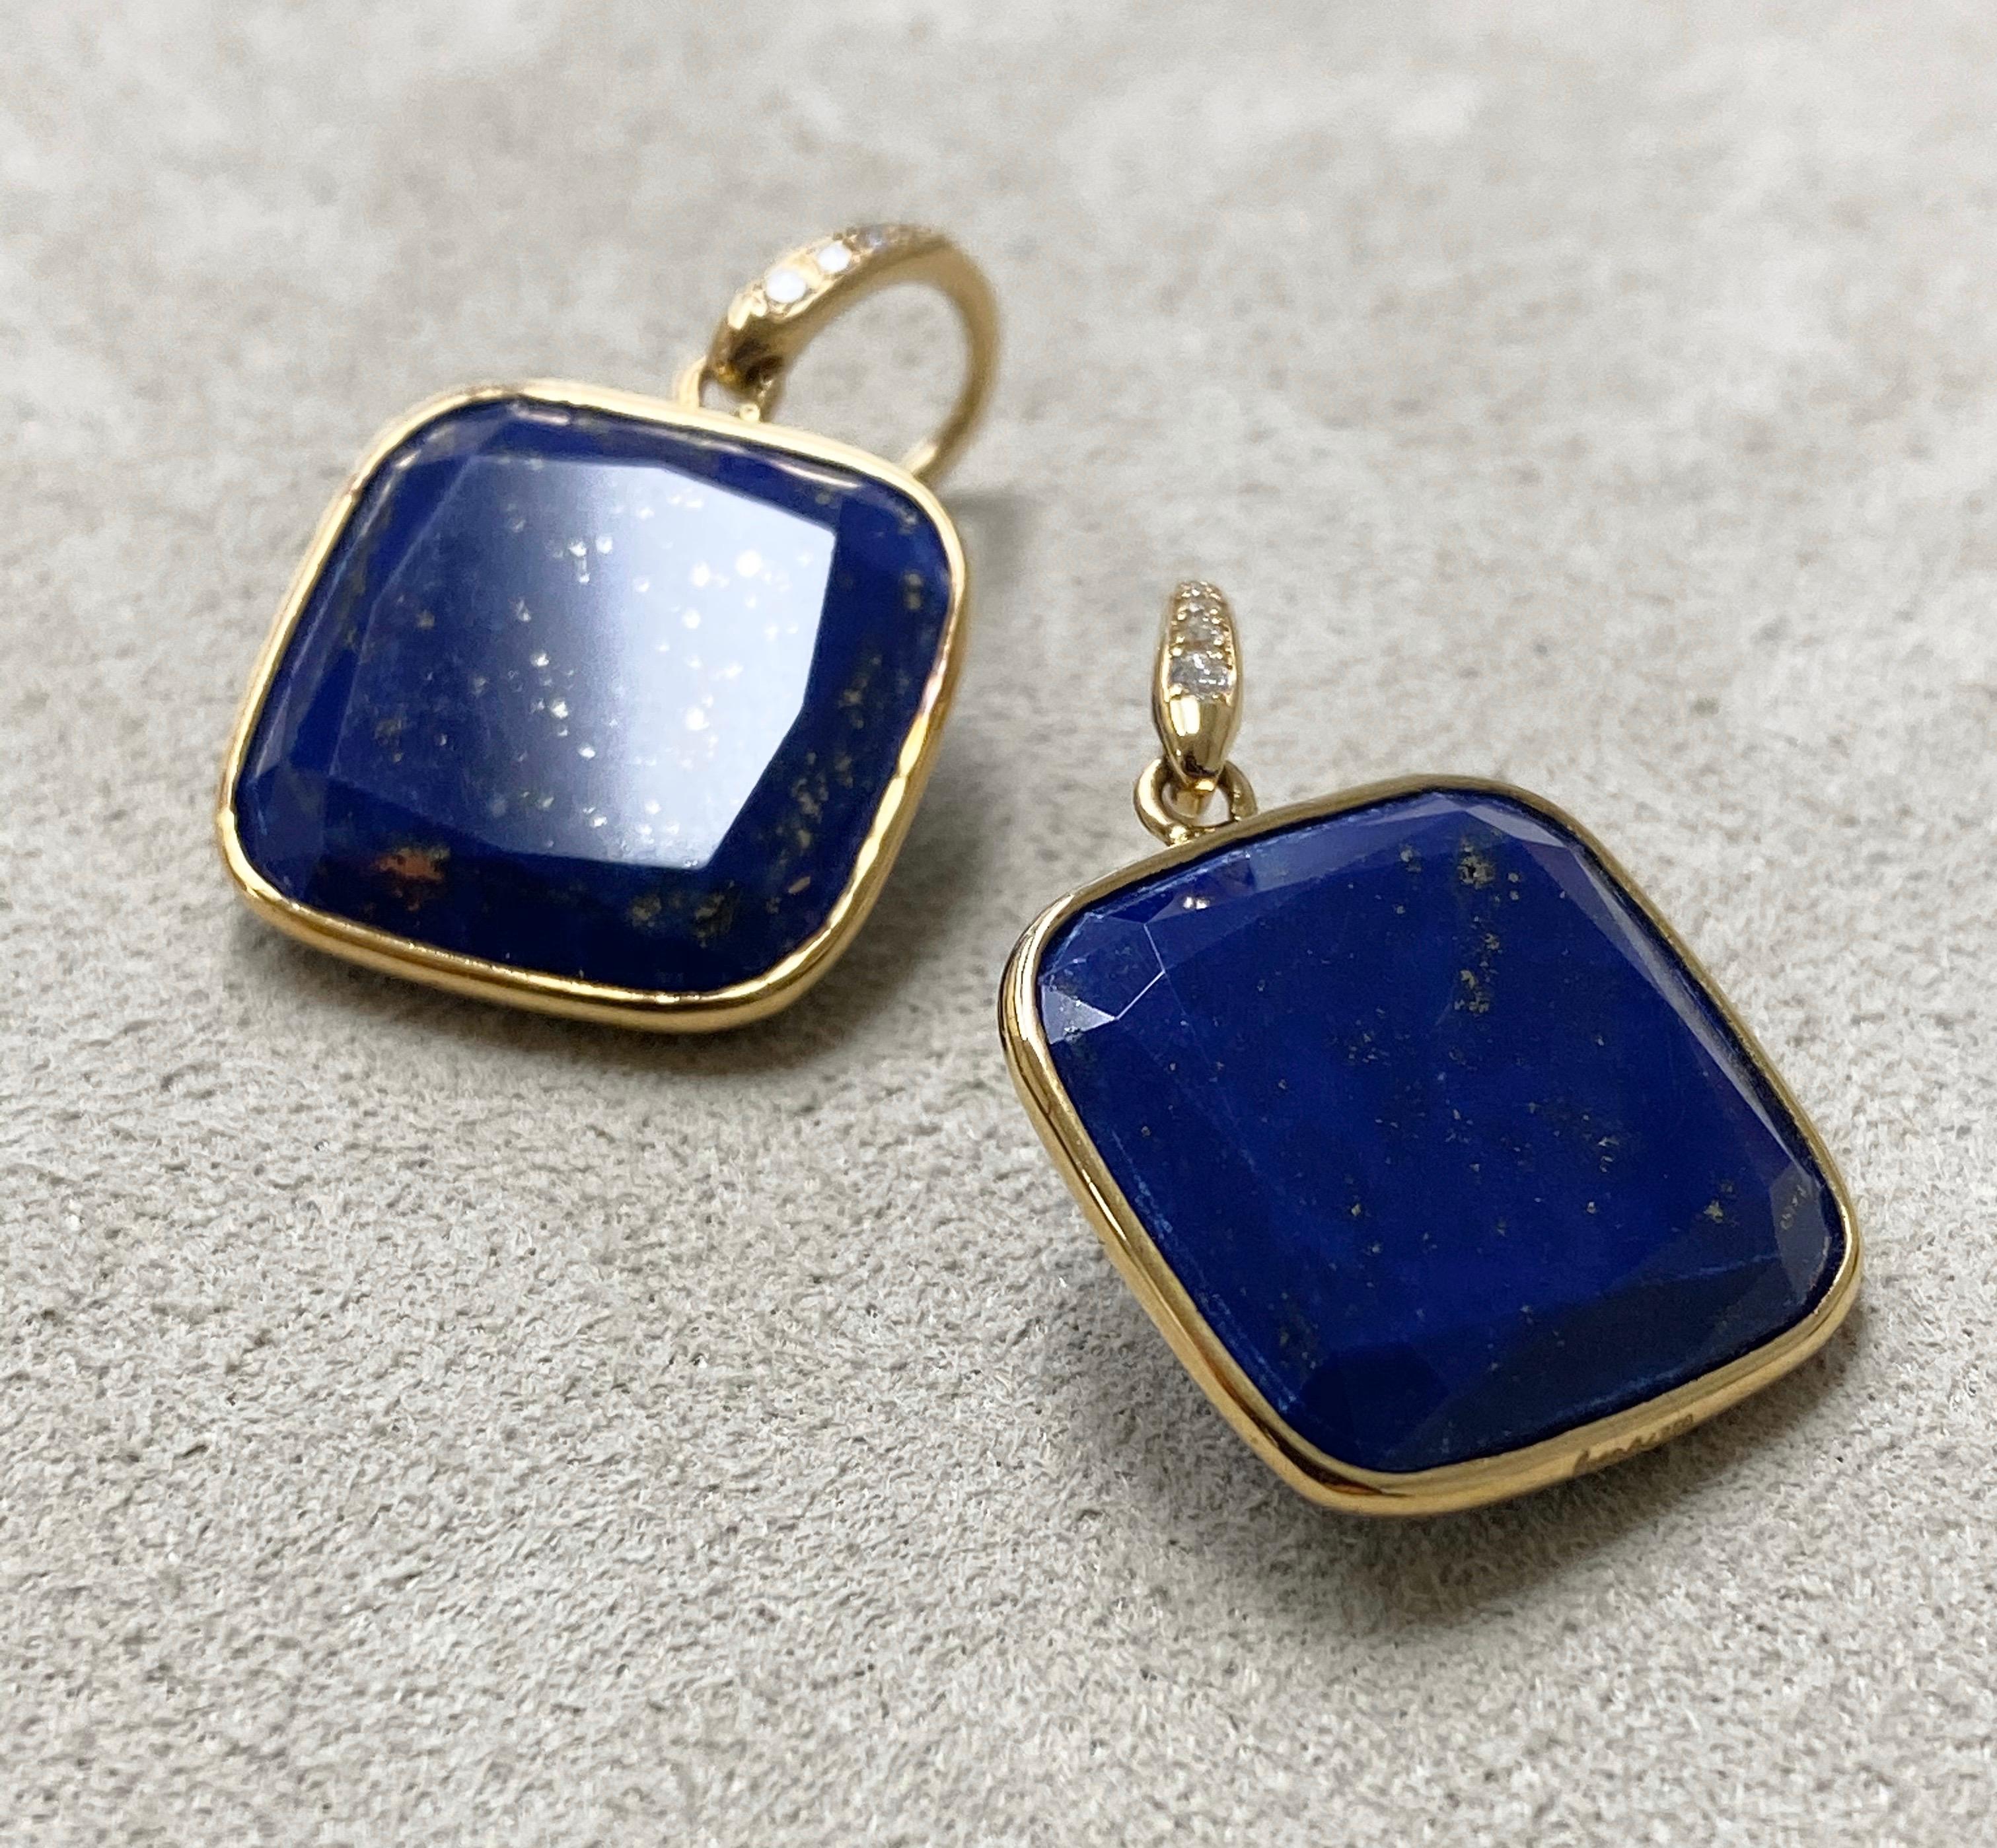 Created in 18kyg
Lapis Lazuli cushions 19.5 cts approx
Diamonds 0.05 ct approx
One of a kind


About the Designers ~ Dharmesh & Namrata

Drawing inspiration from little things, Dharmesh & Namrata Kothari have created an extraordinary and refreshing